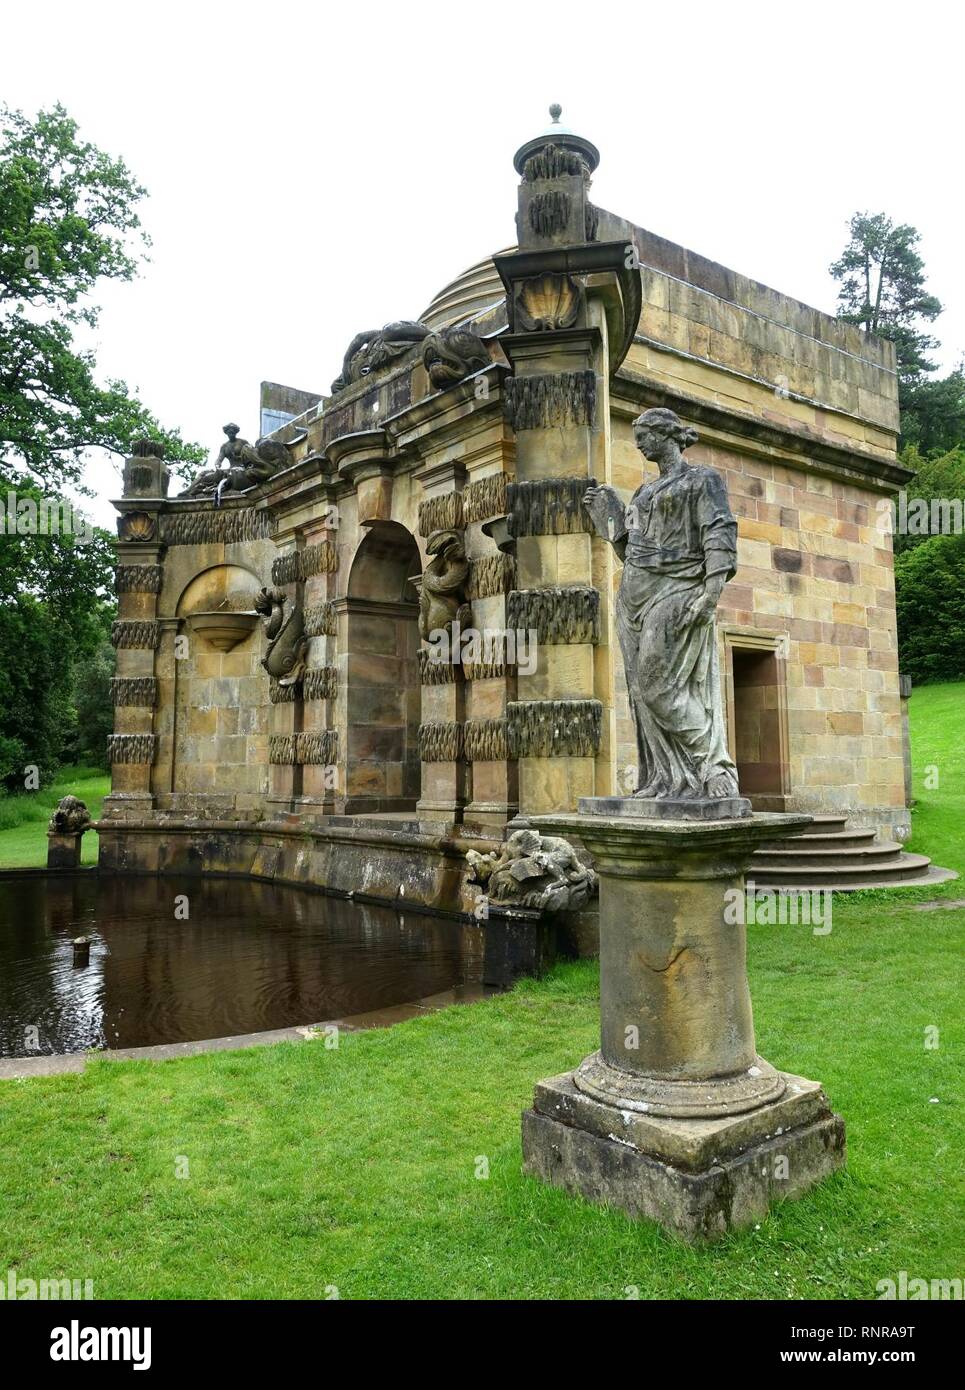 Cascade house, 1702-1703, designed by Thomas Archer, with carvings by Samuel Watson and Henri Nadauld - Chatsworth House - Derbyshire, England - Stock Photo